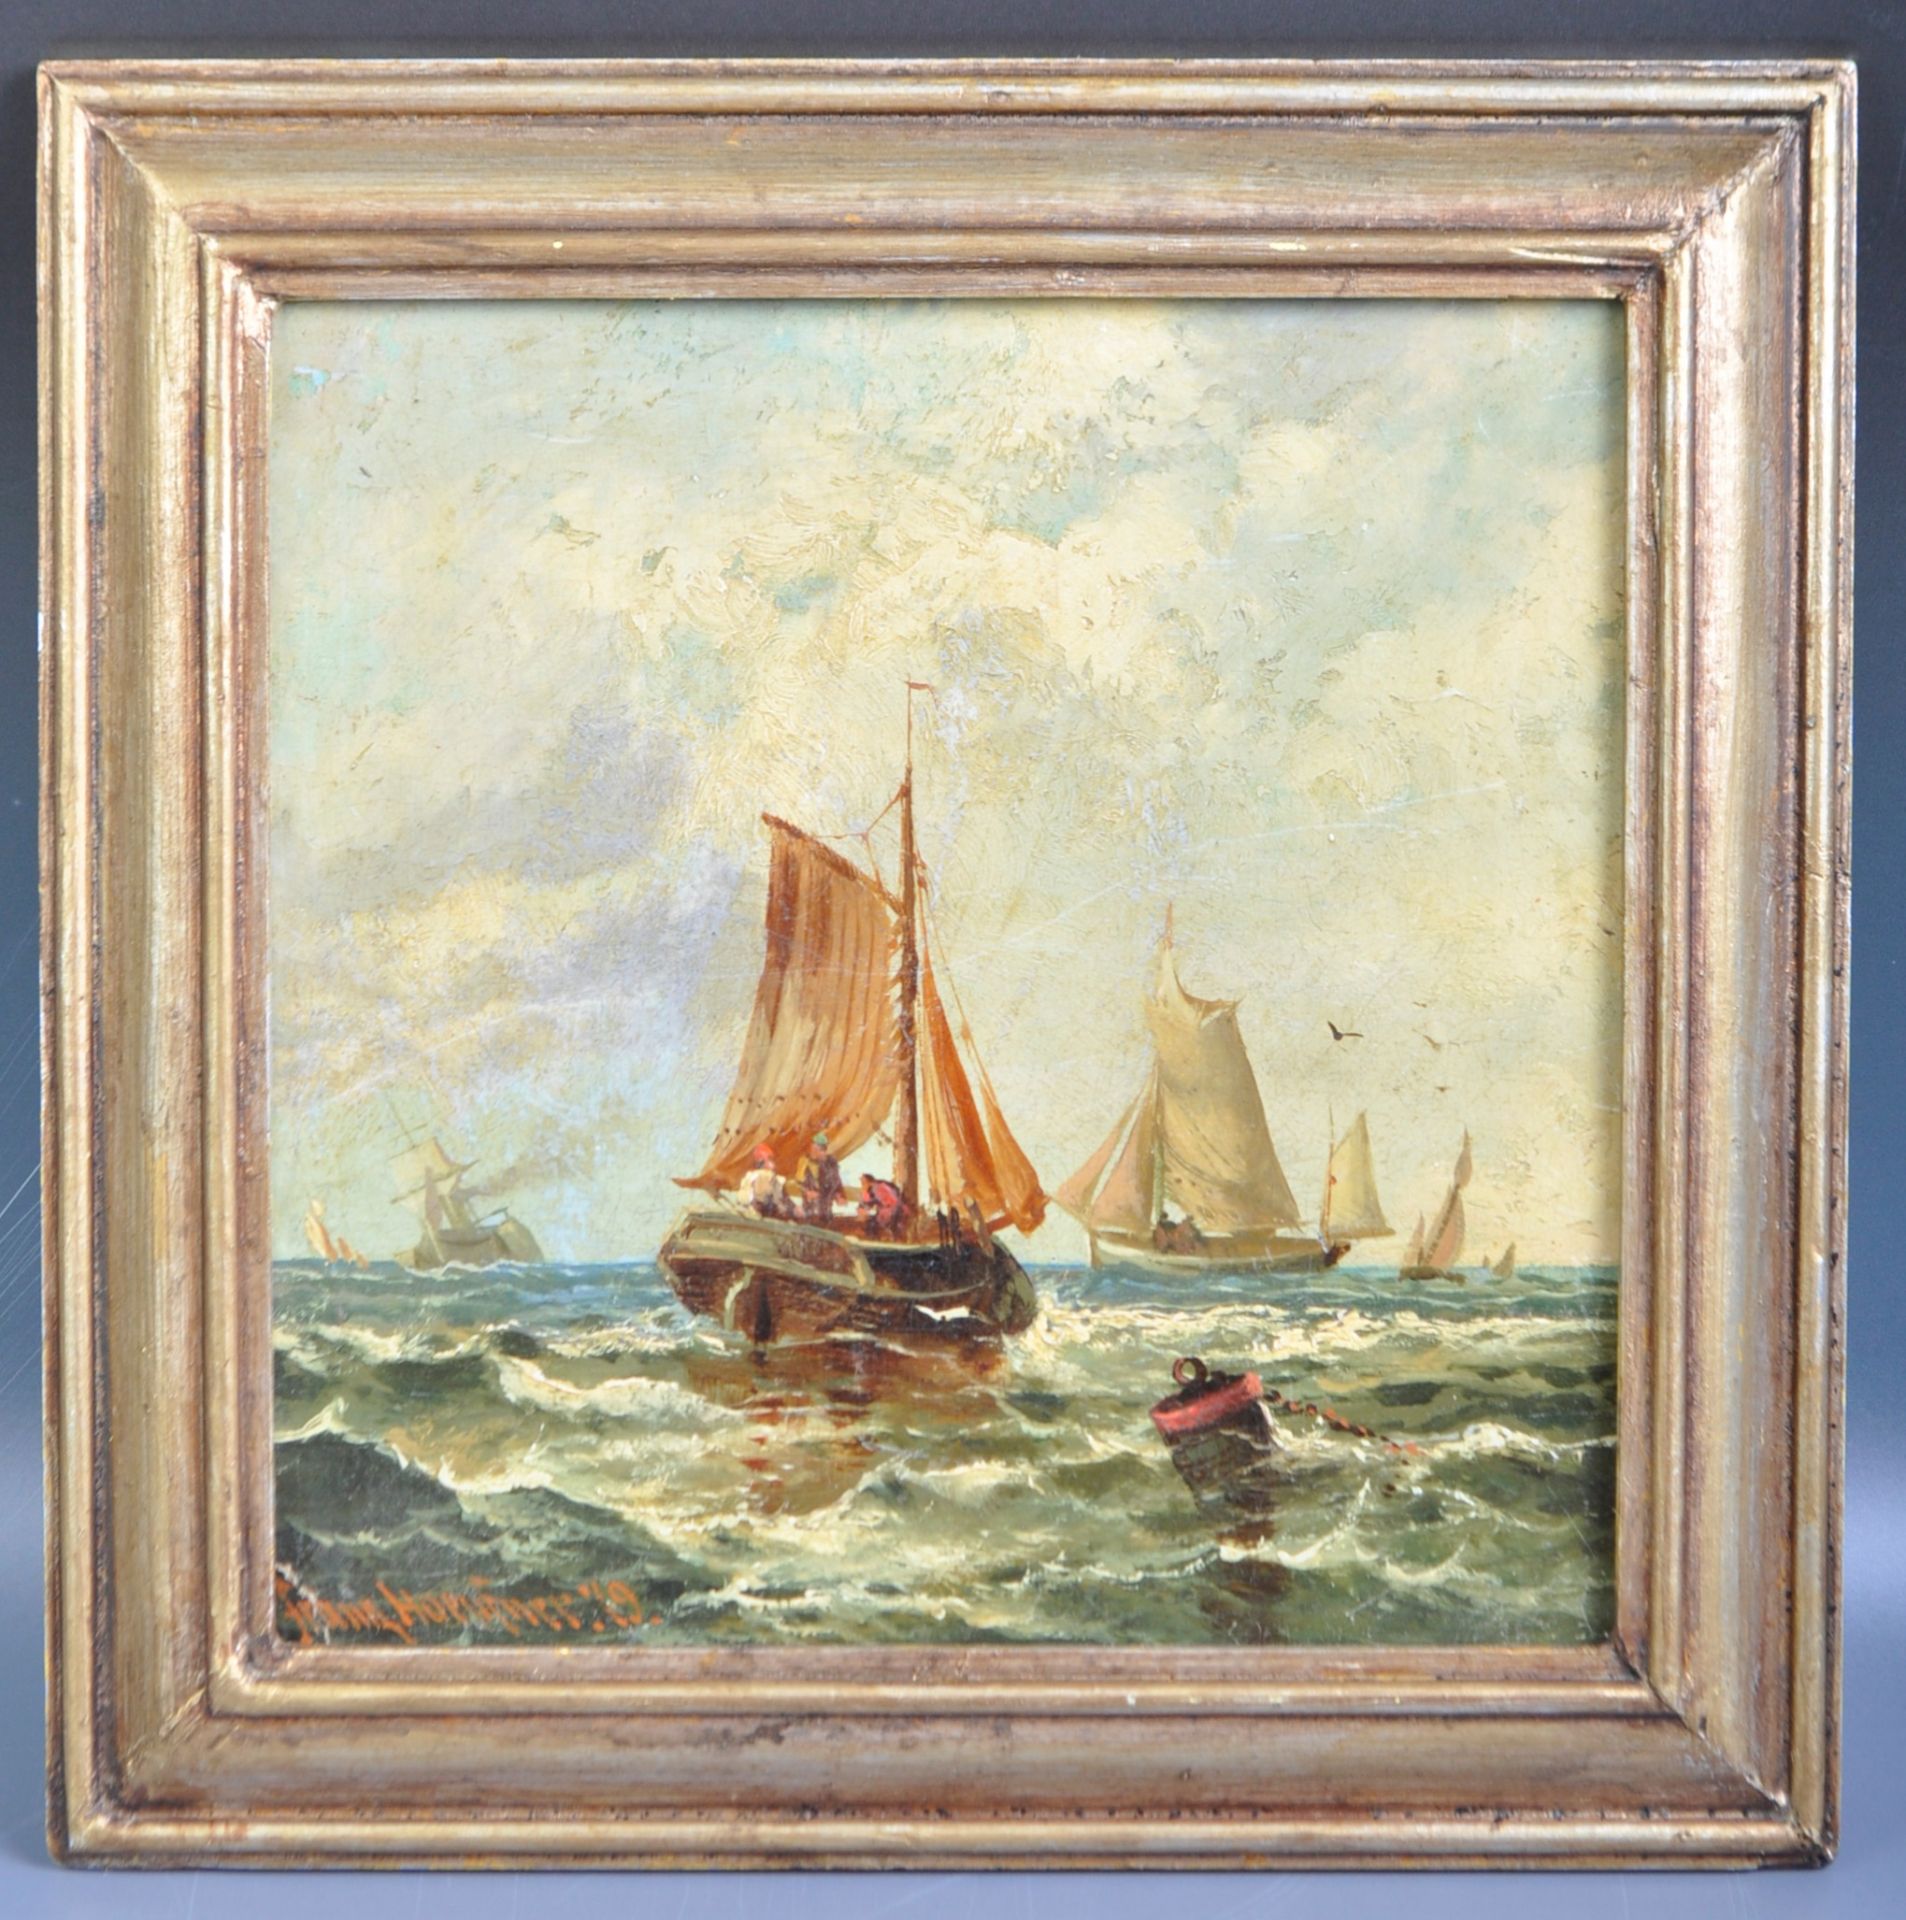 19TH CENTURY GERMAN OIL ON BOARD PAINTING BY FRANZ HOEPFNER